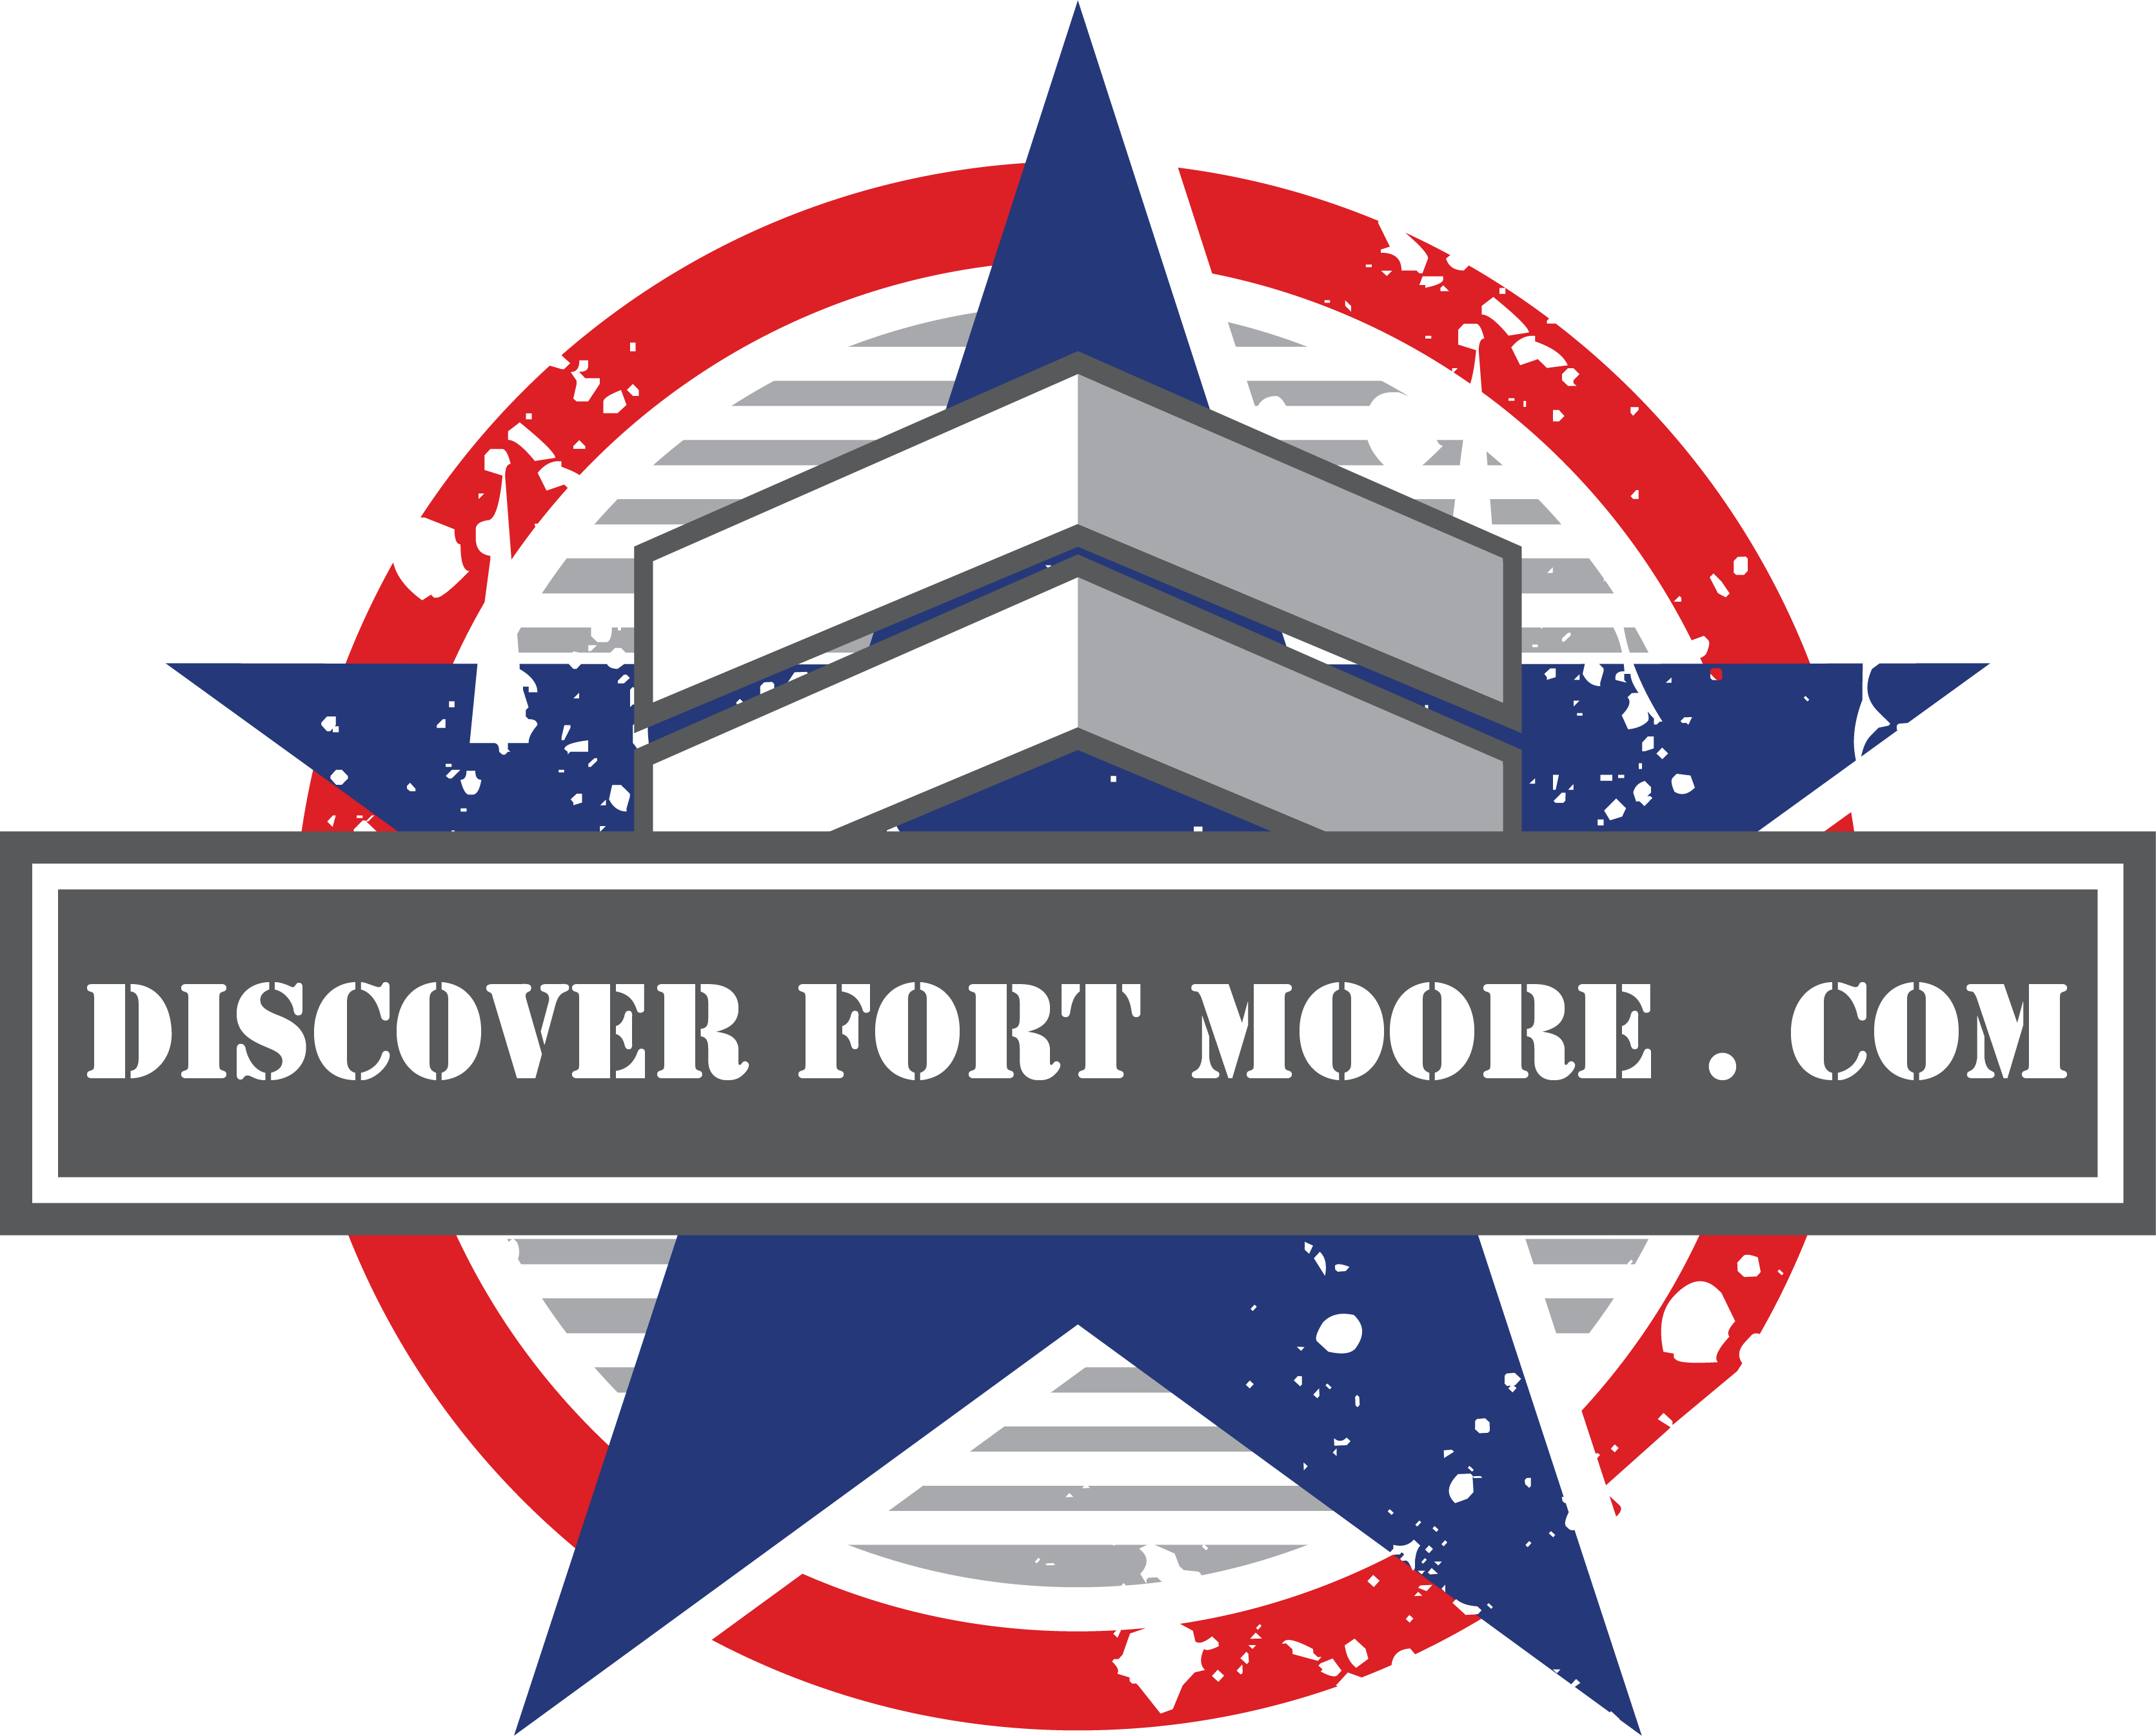 Find and post events on and around Fort Moore, GA